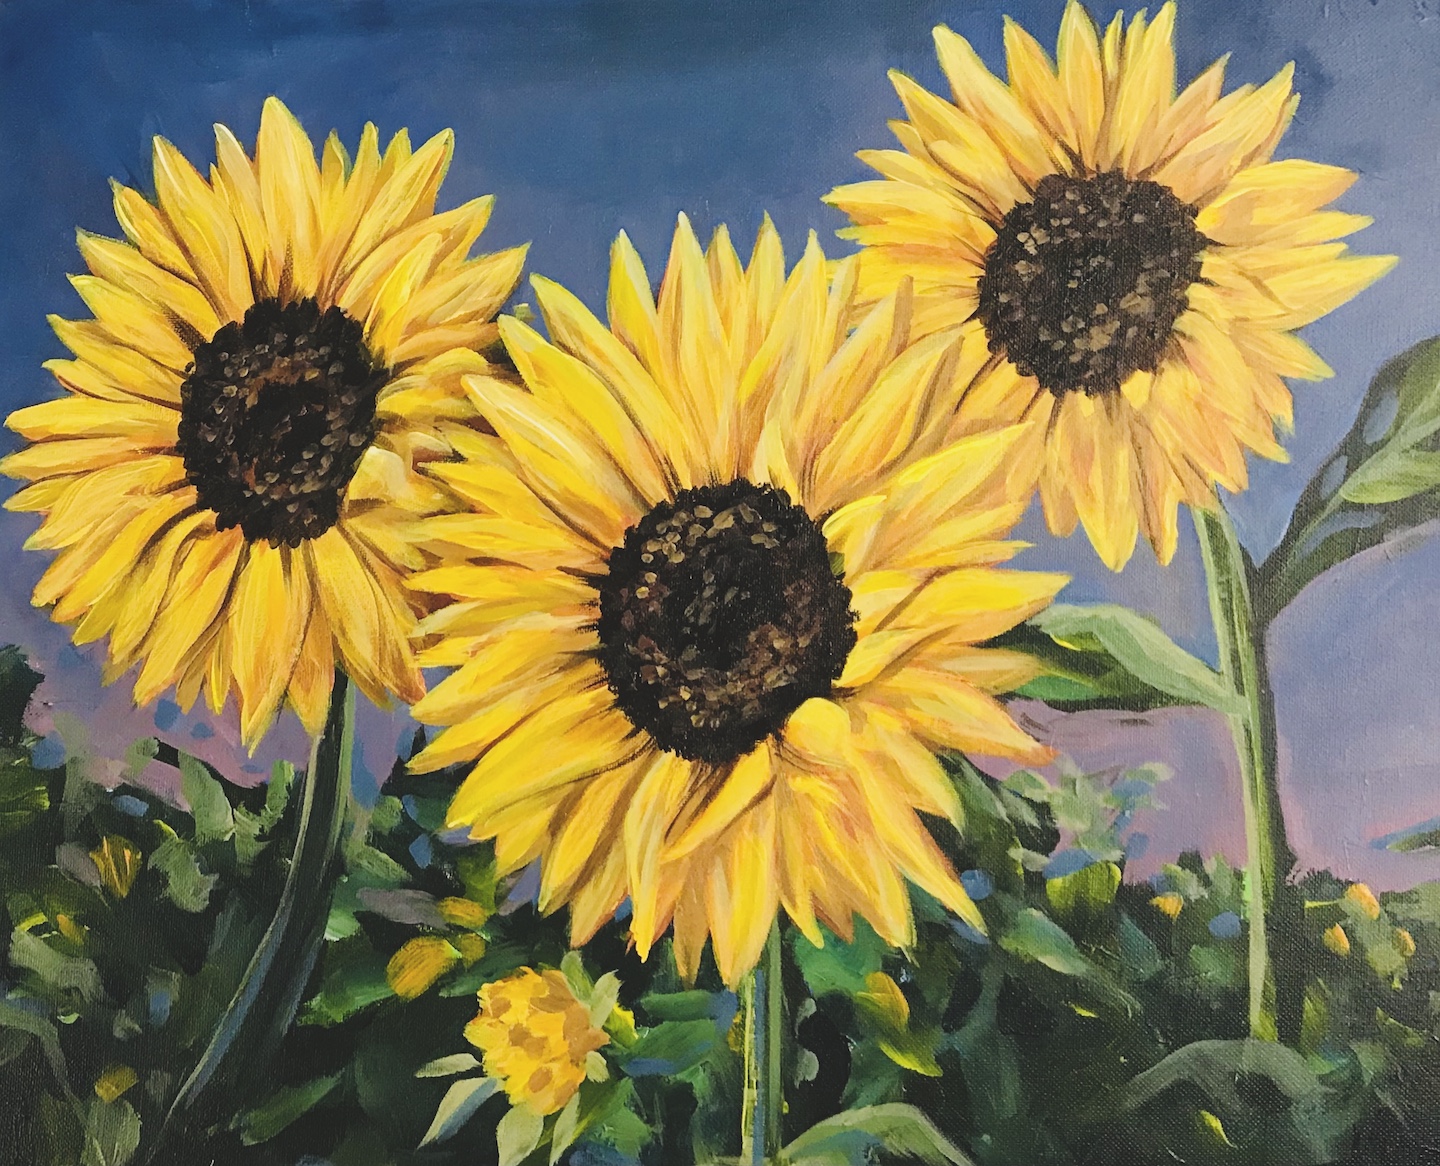 Sunflowers at Dusk | 3:00-5:00pm